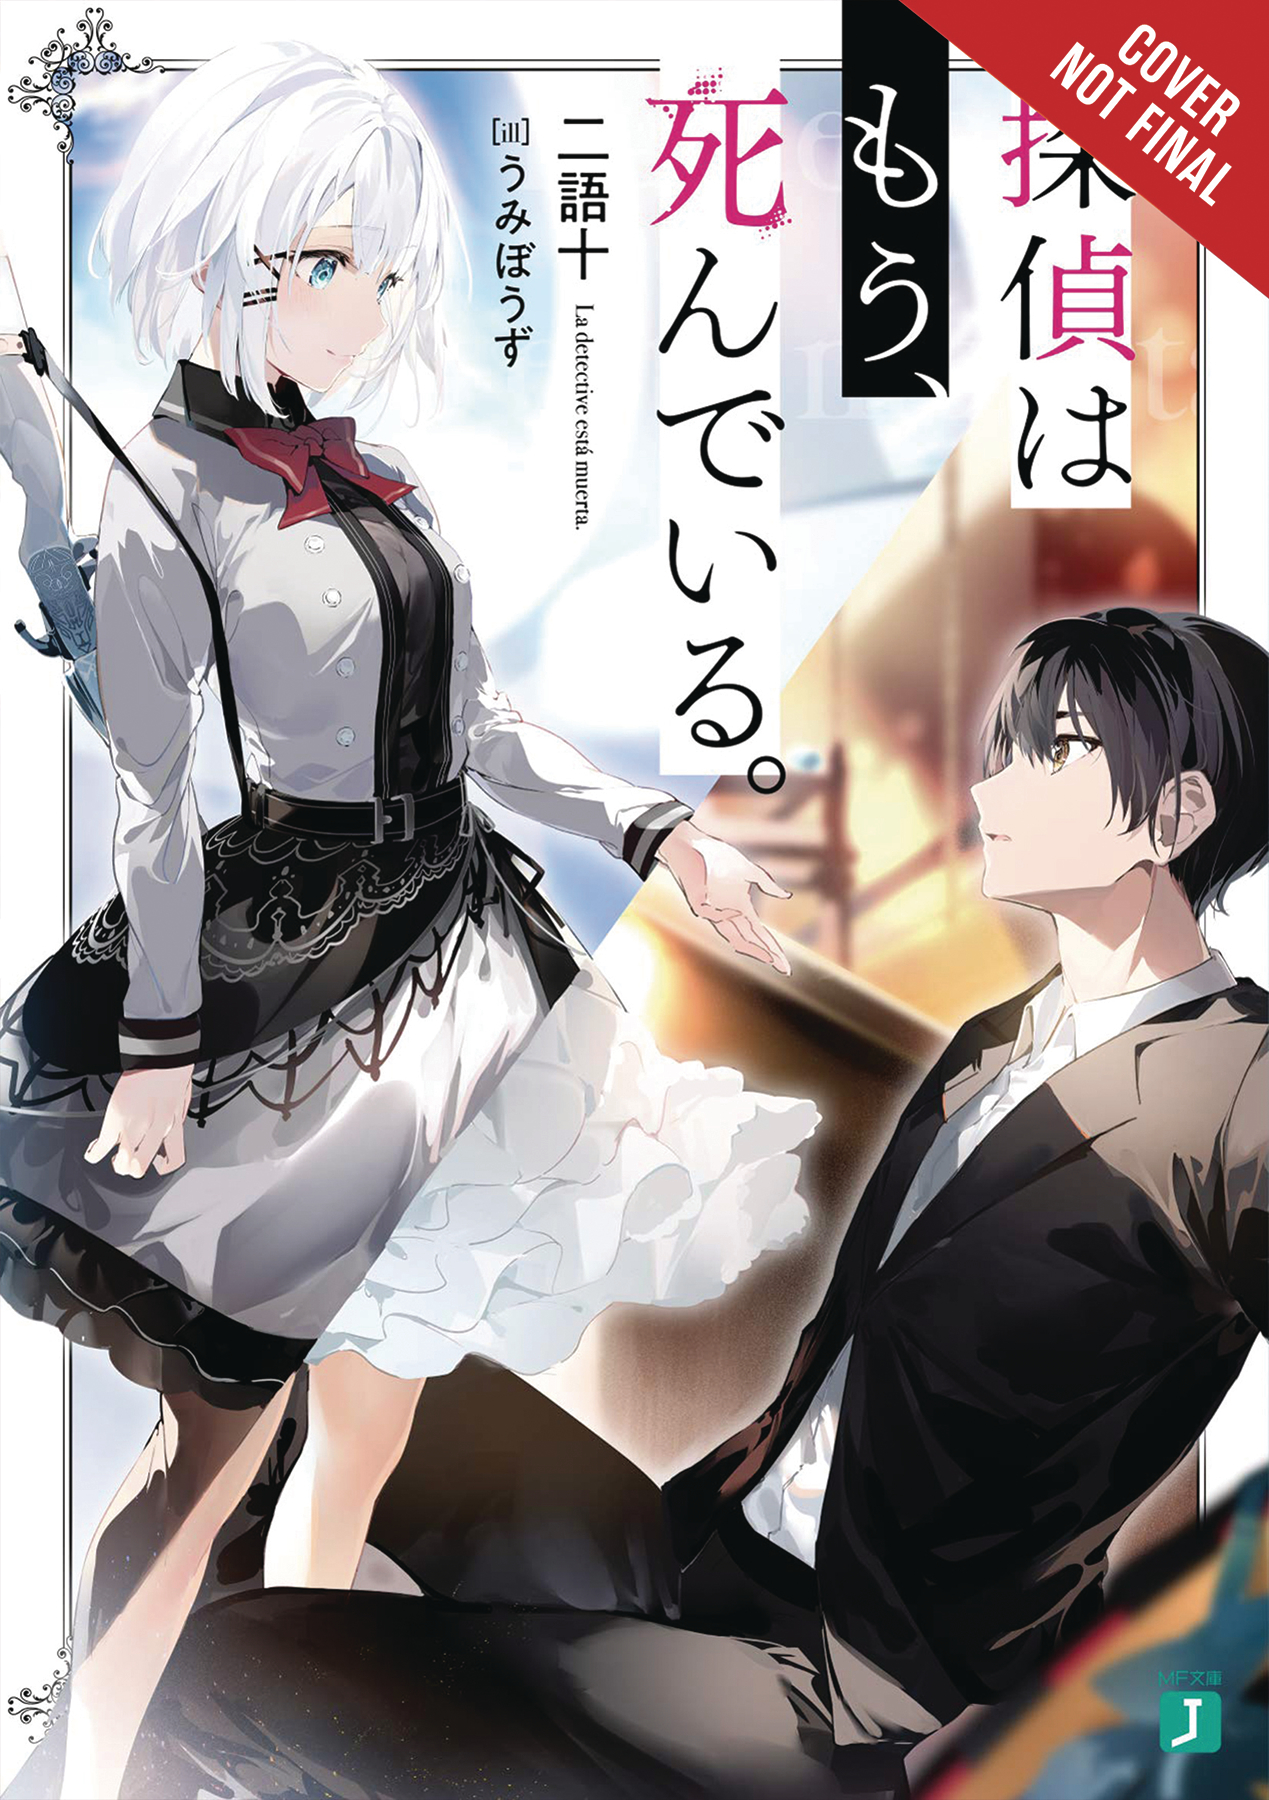 Detective Is Already Dead Soft Cover Volume 1 (Mature)